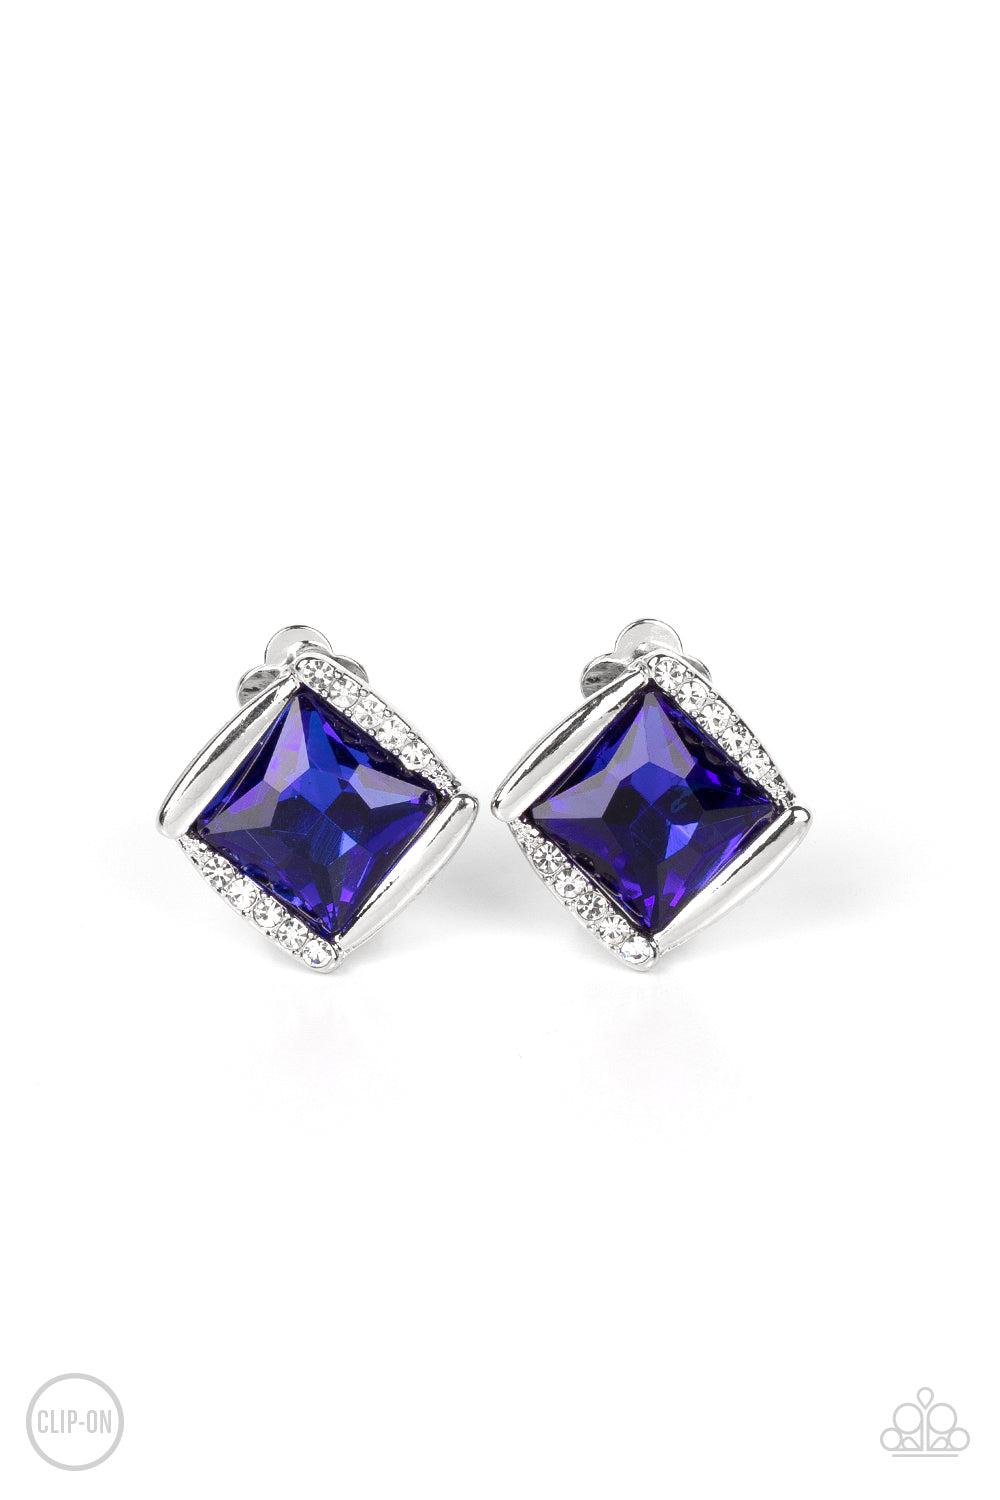 Sparkle Squared Blue &amp; White Rhinestone Clip-on Earrings - Paparazzi Accessories- lightbox - CarasShop.com - $5 Jewelry by Cara Jewels